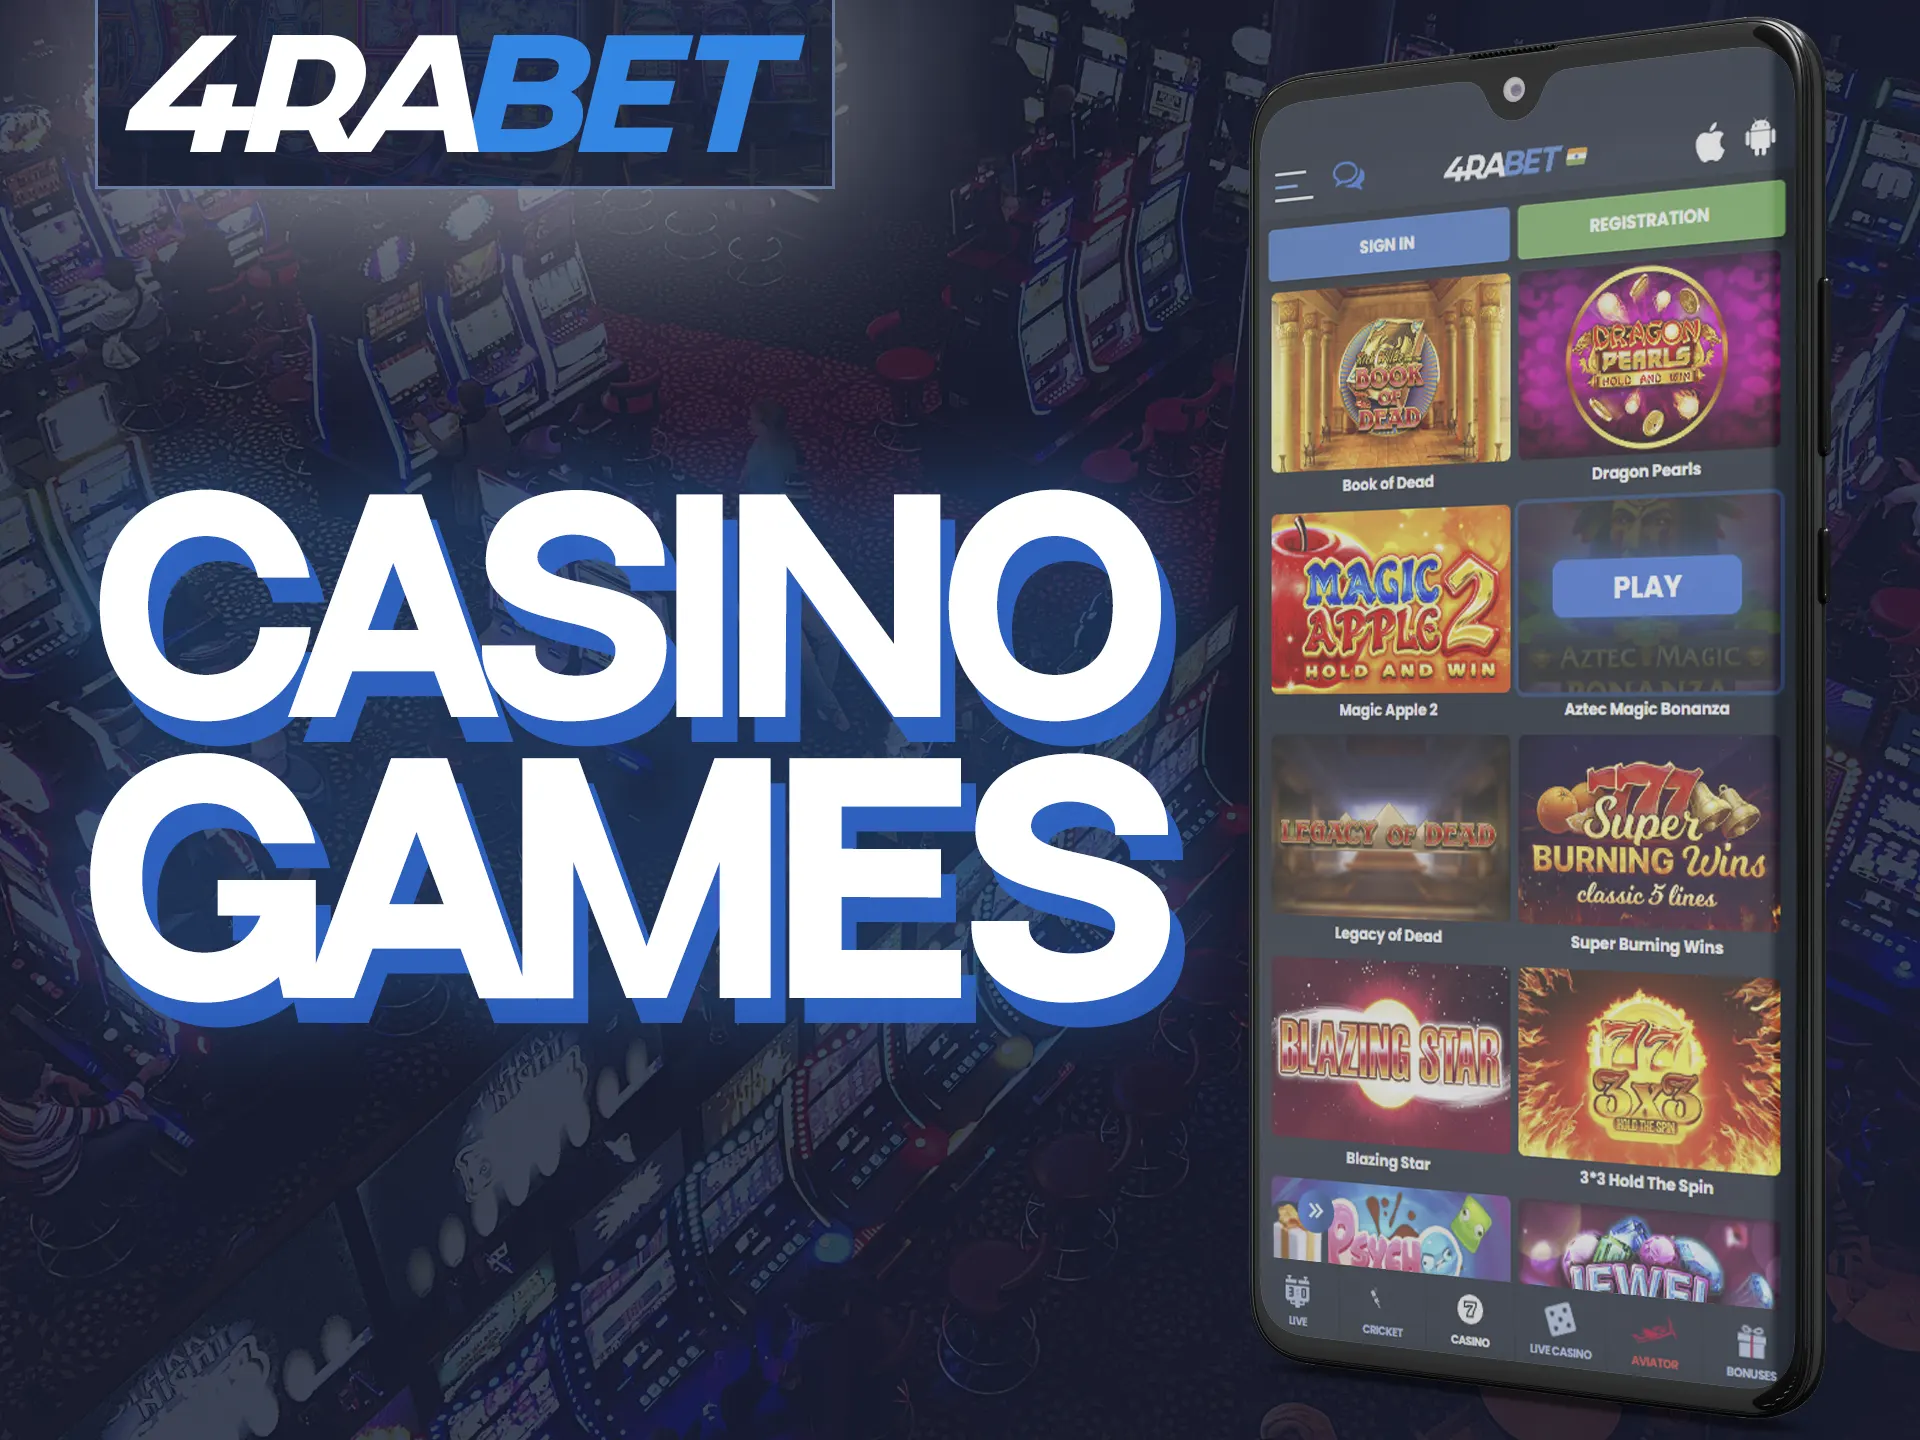 Play casino games on the 4Rabet mobile app.